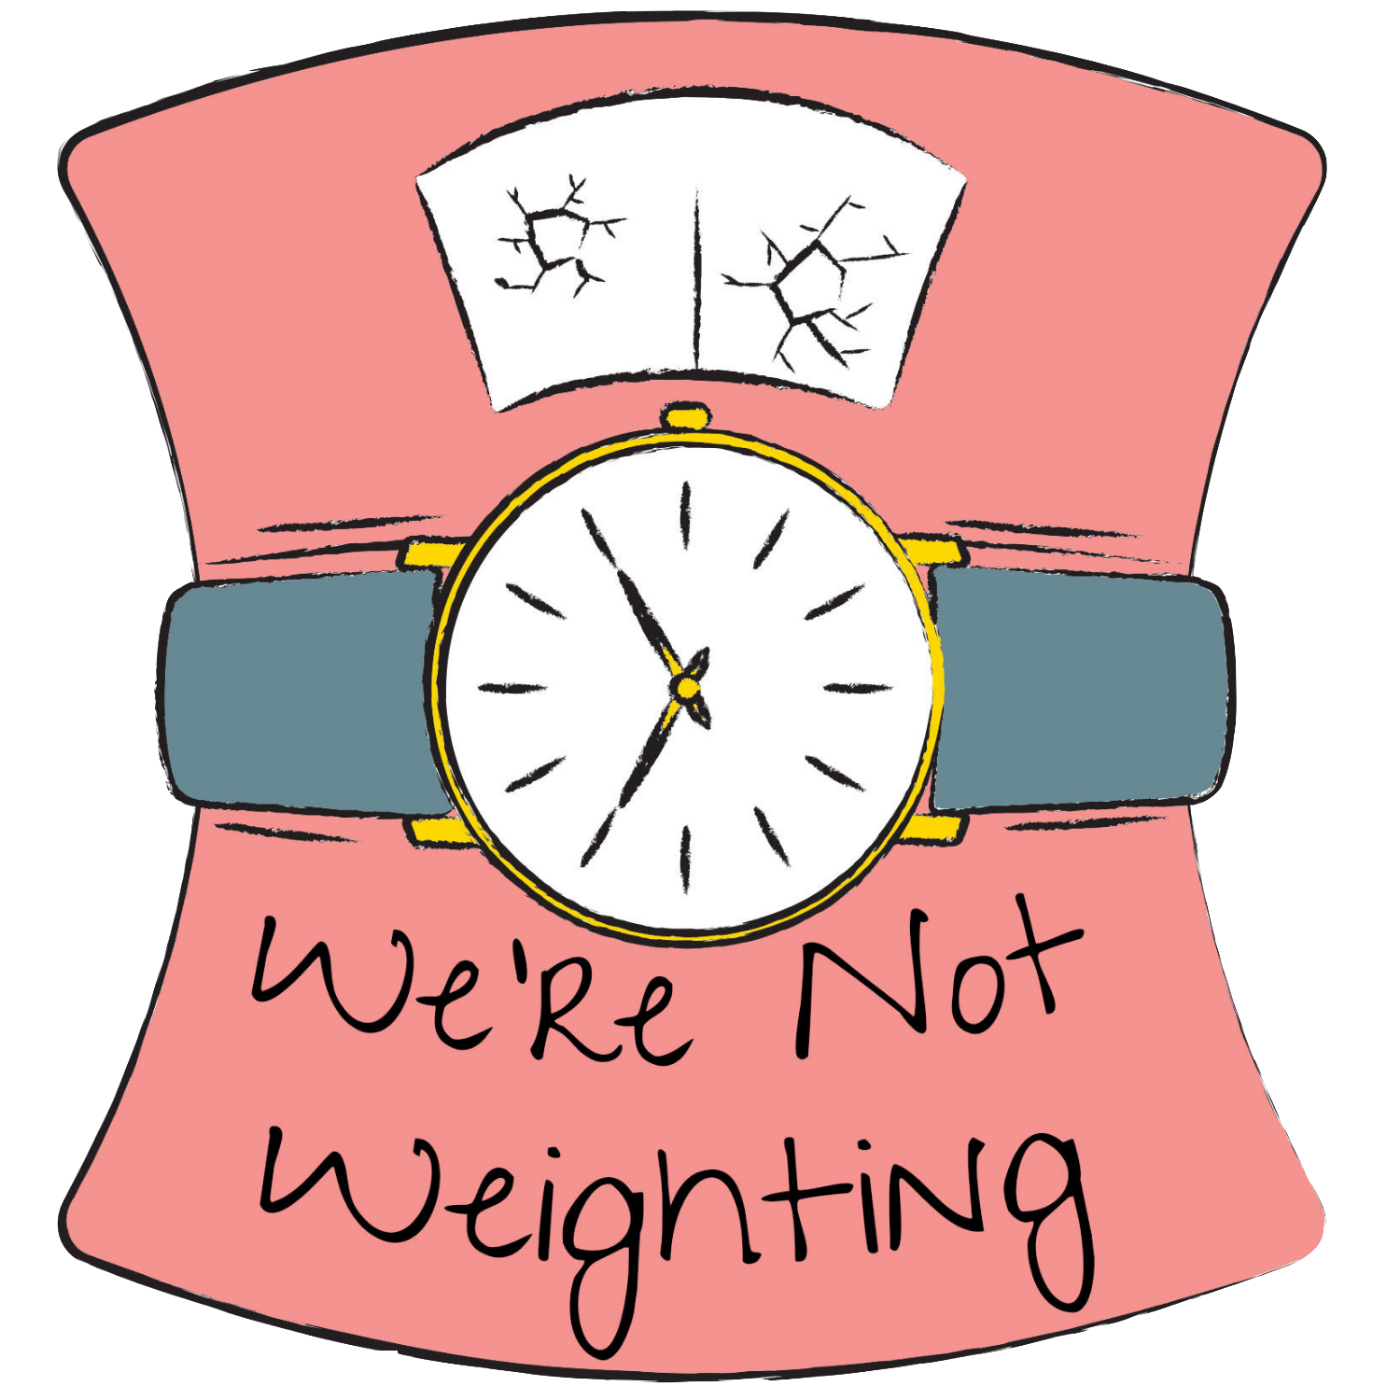 We're Not Weighting Podcast